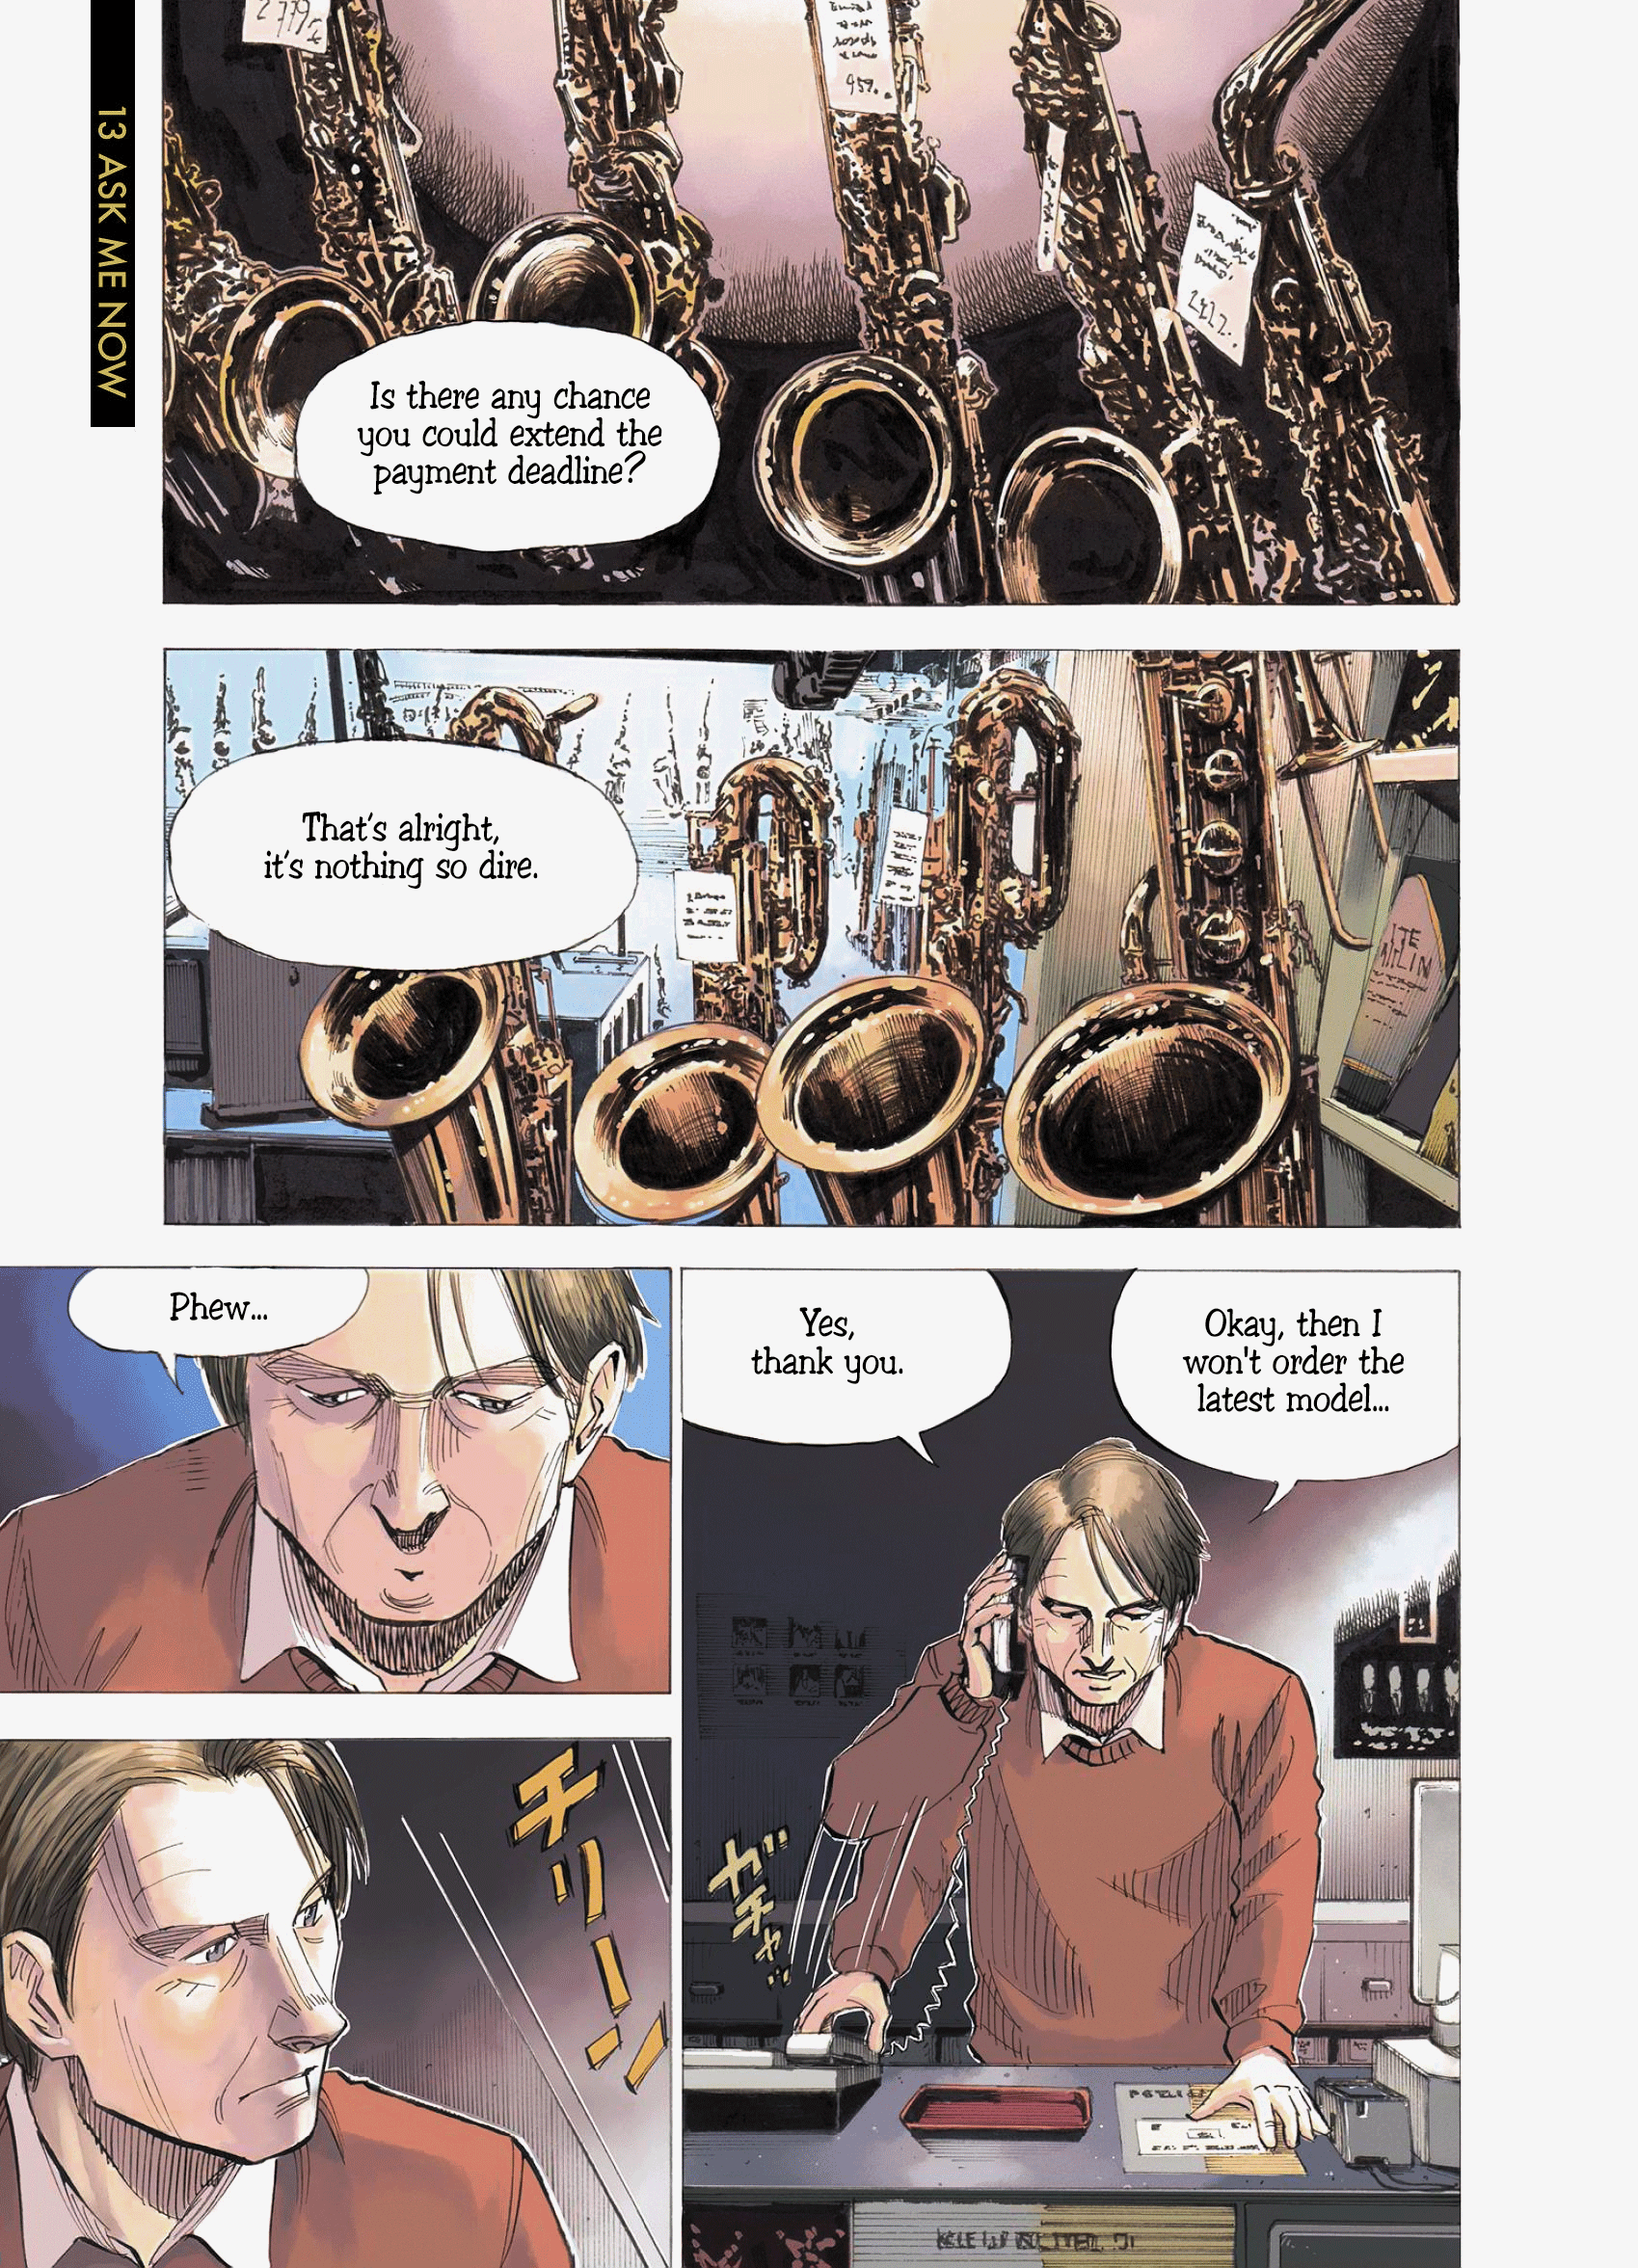 Blue Giant Supreme Vol.2 Chapter 13: Ask Me Now - Picture 2